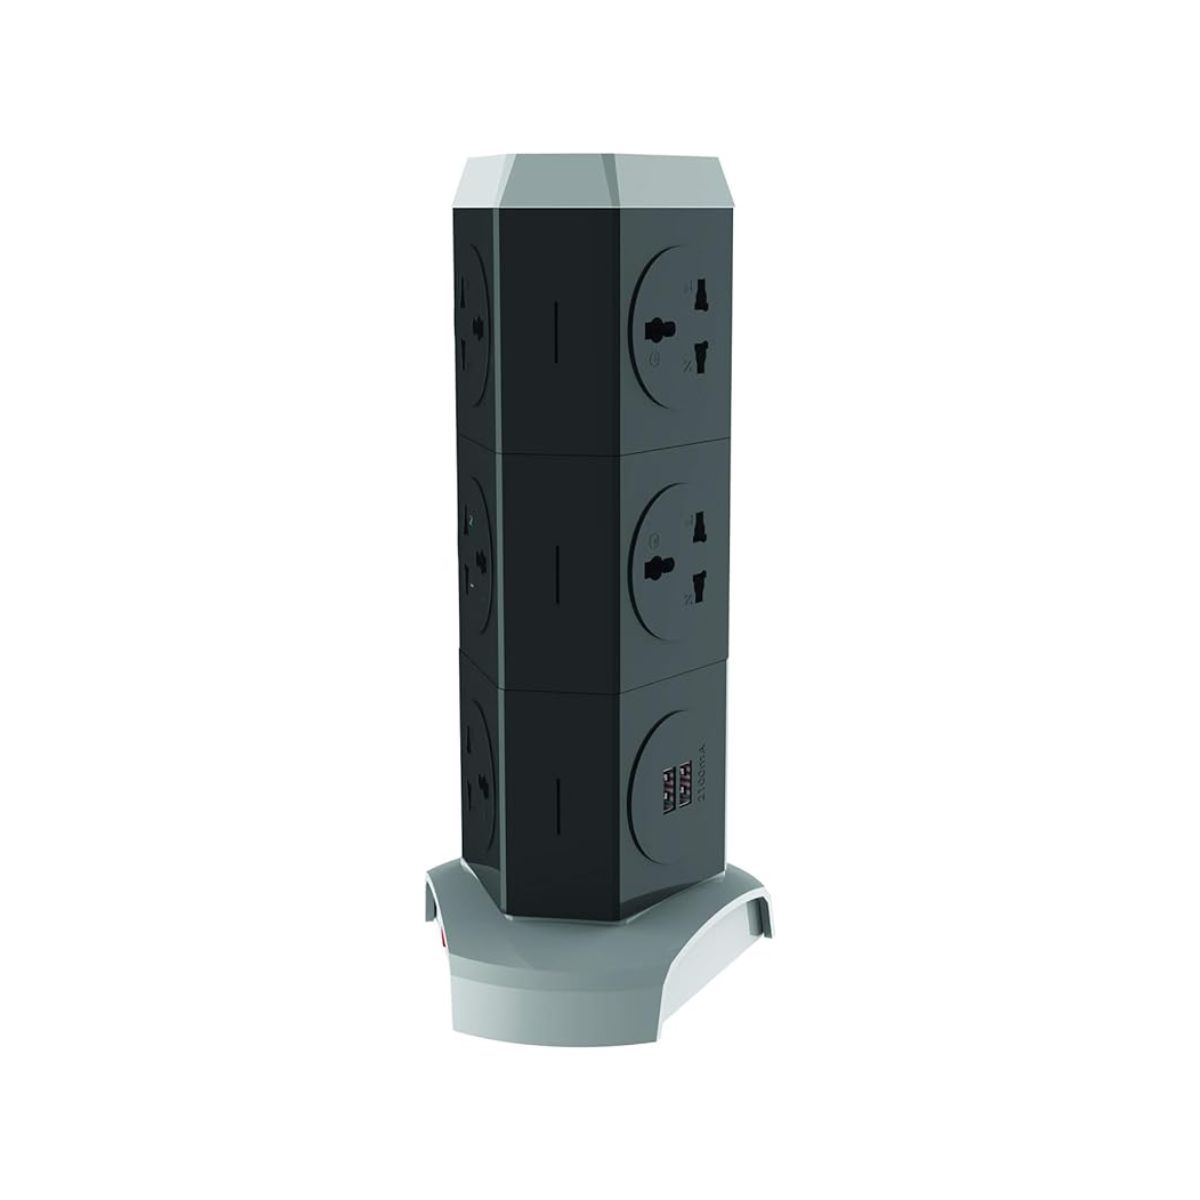 Anchor Tower Spike Guard (Vertical) 180 degree Rotating with USB (22059), 2400 Watts, 240 Volts, Grey, 5 Socket